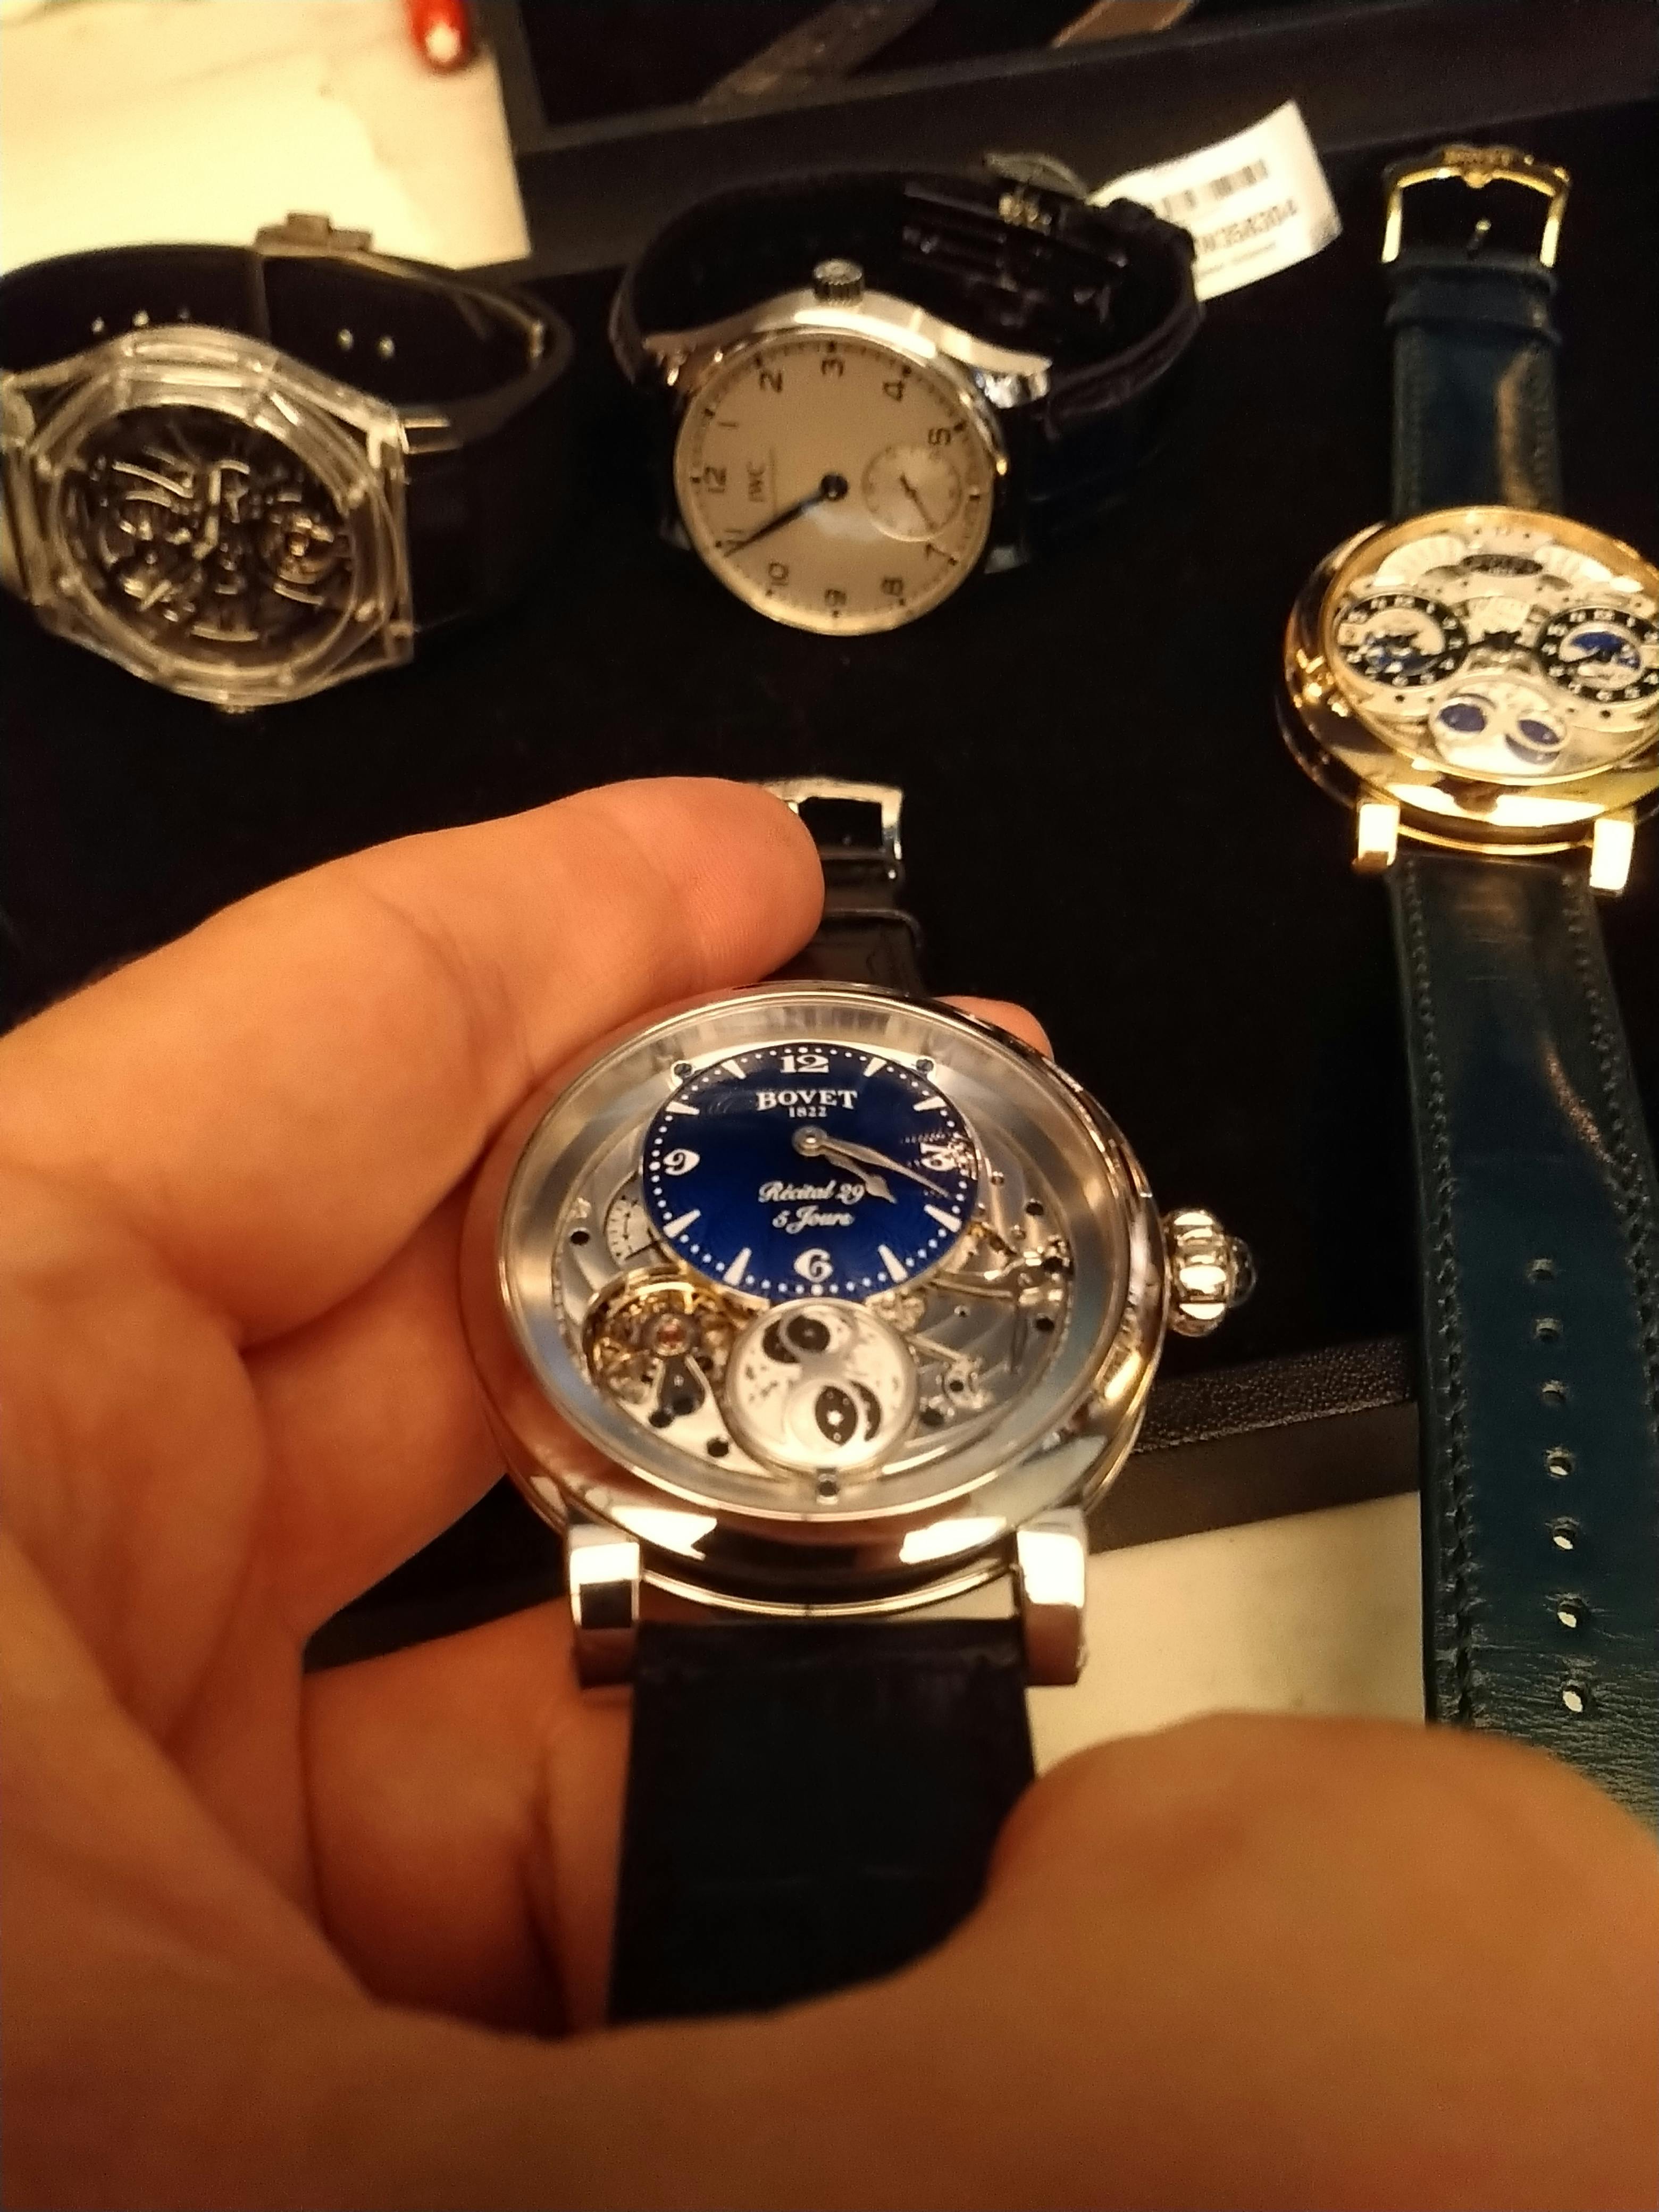 Lots of watches on show at a multi-brand boutique